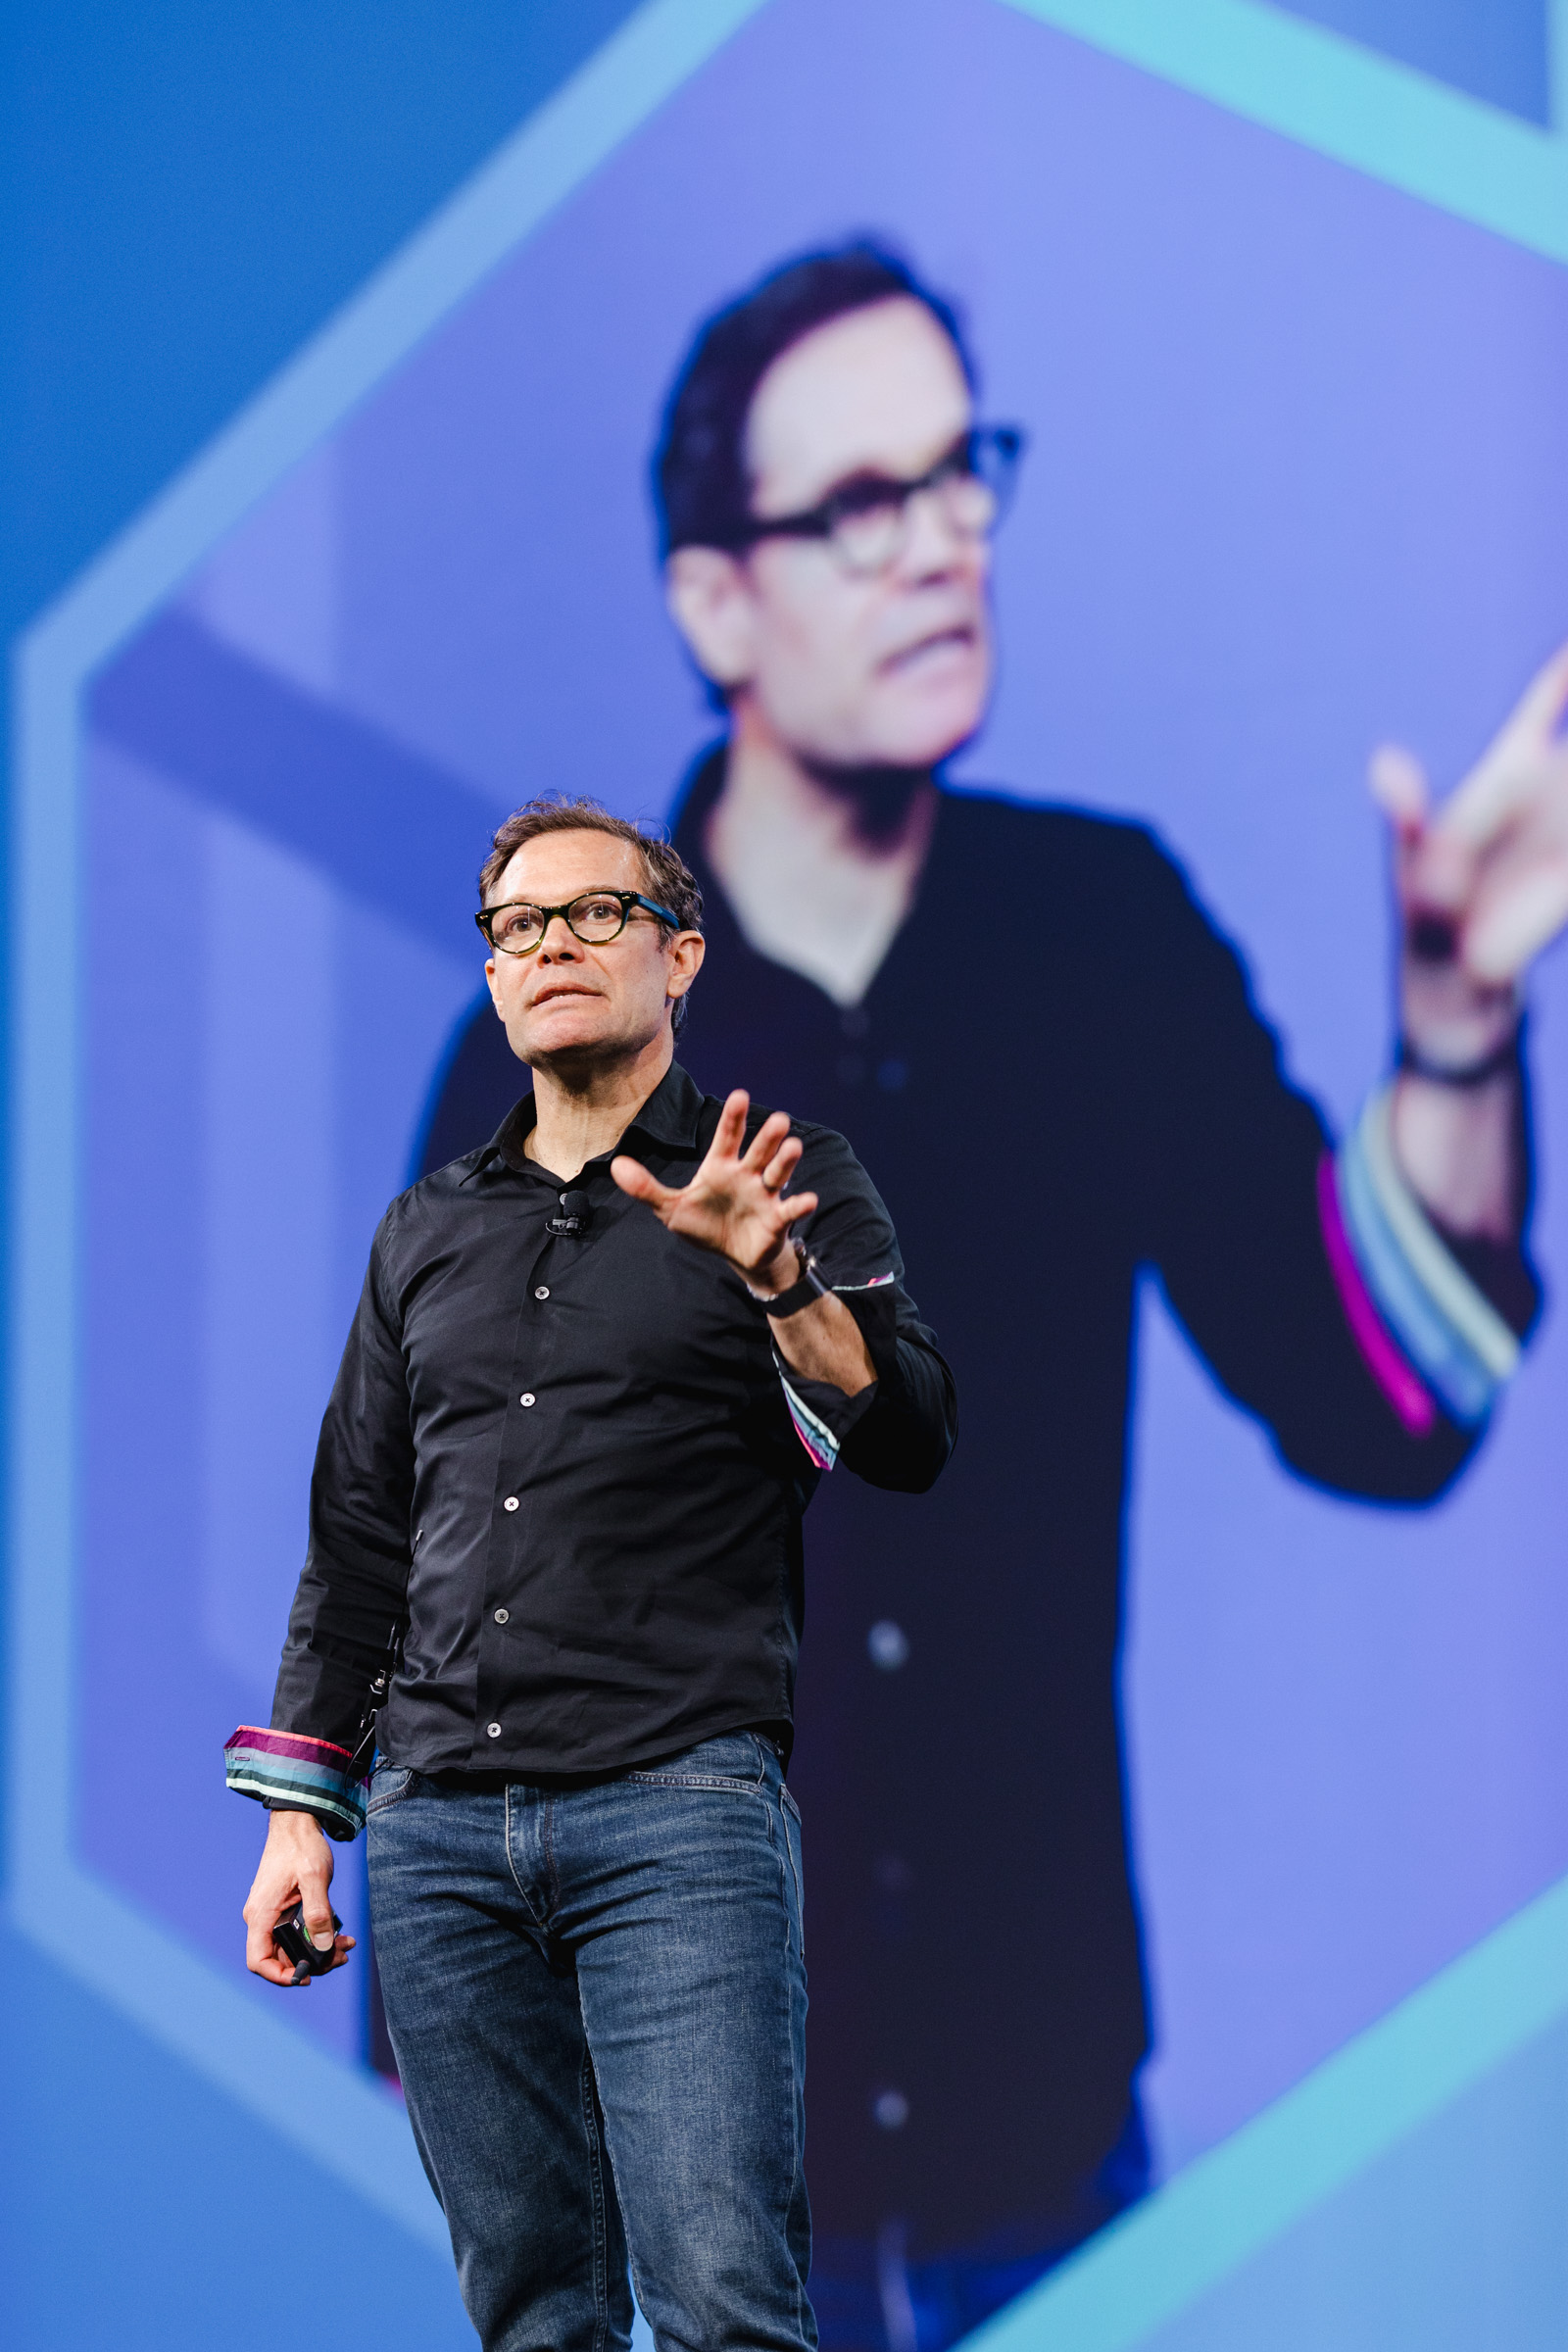 Man in black shirt and jeans speaking on stage, captured through corporate photography, with a large screen displaying his image.